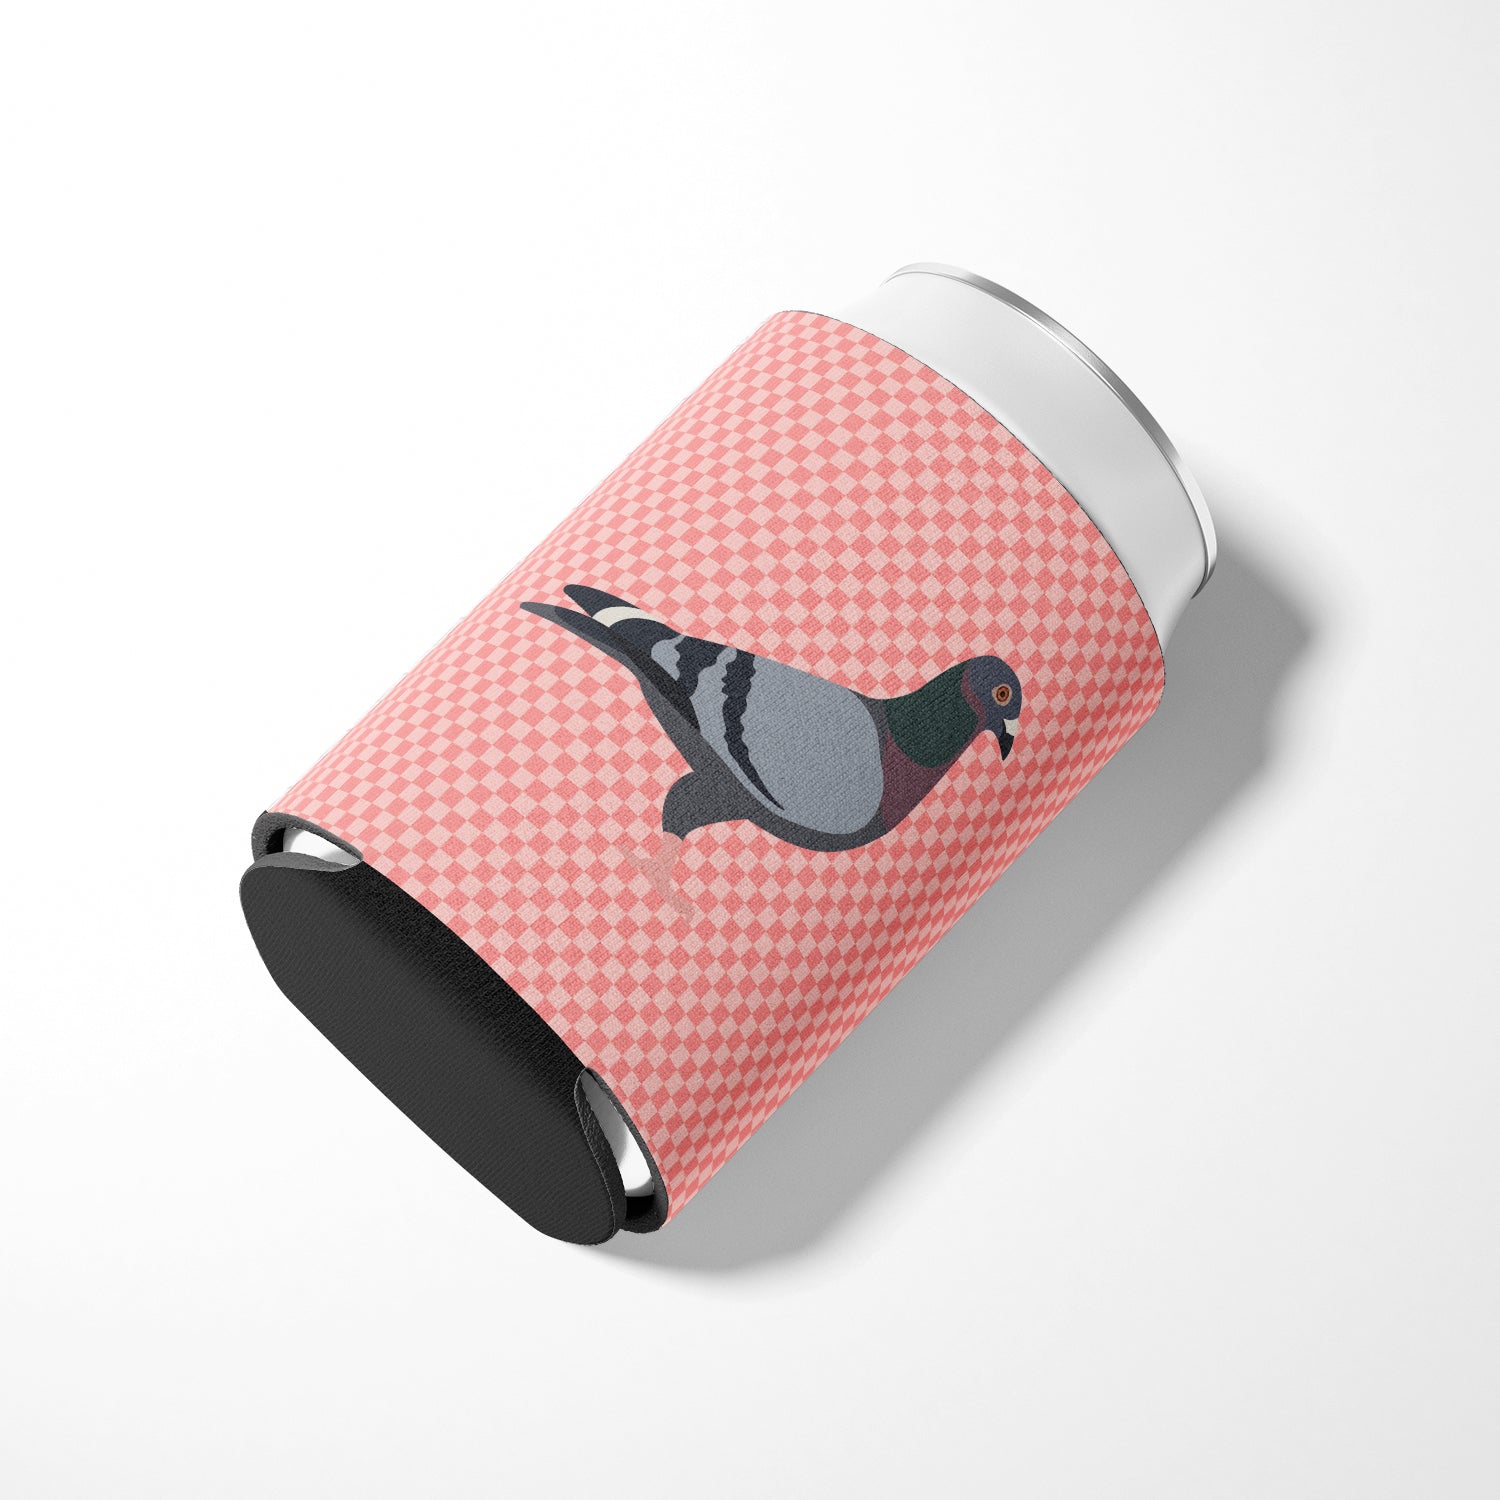 Racing Pigeon Pink Check Can or Bottle Hugger BB7951CC  the-store.com.